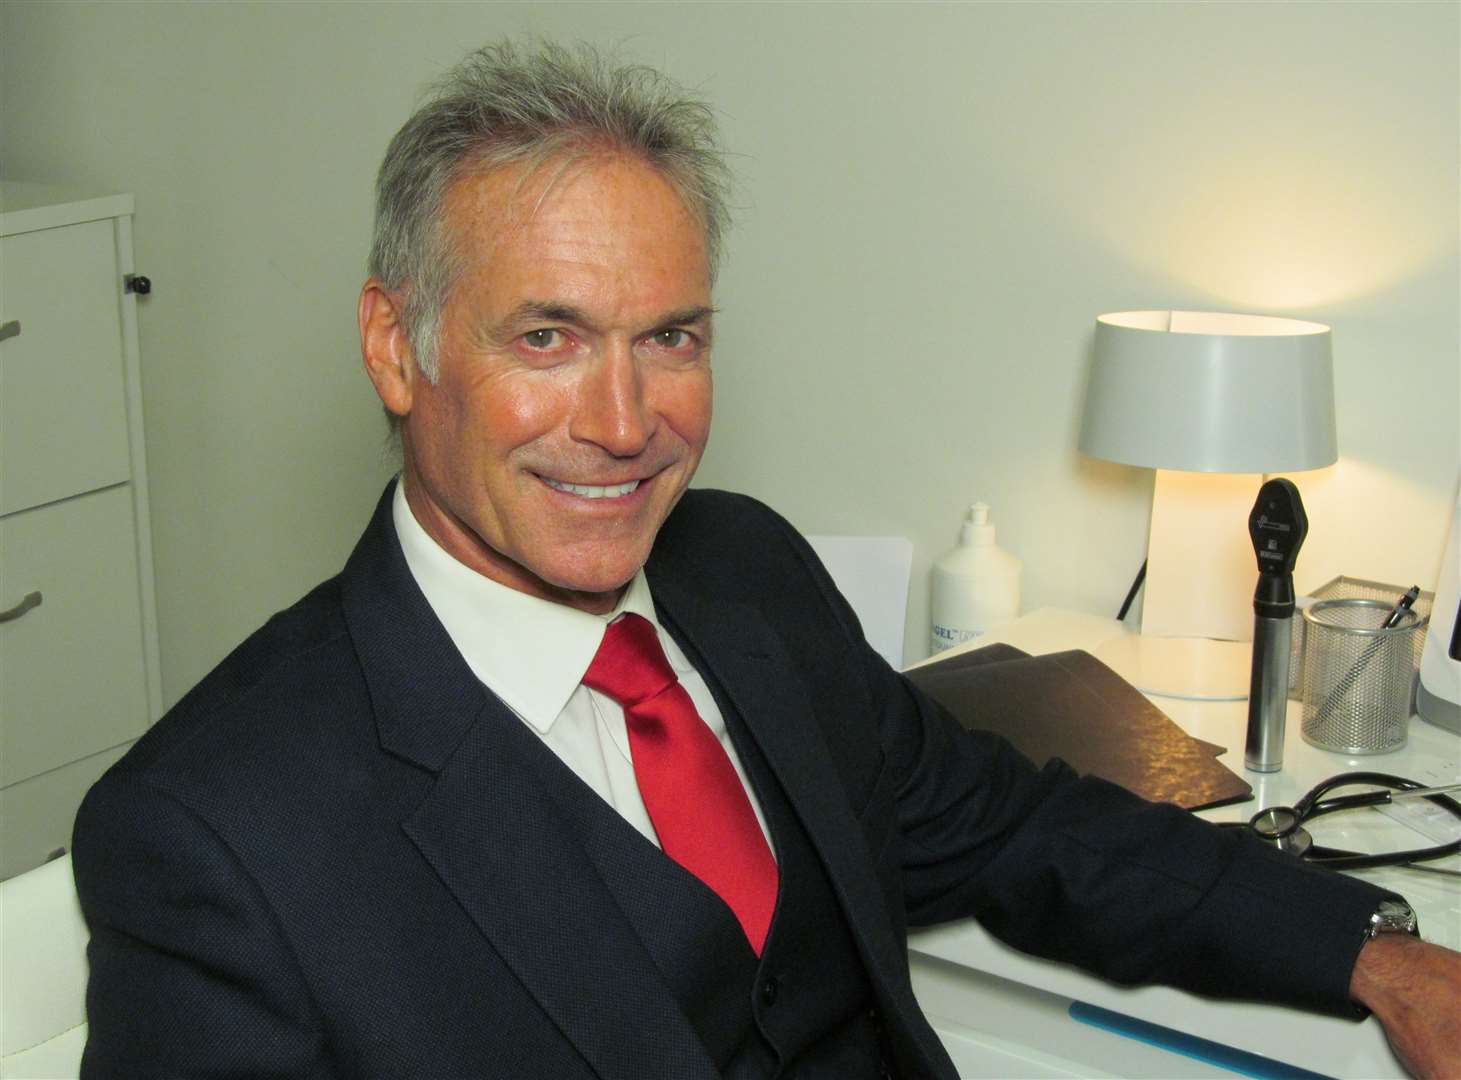 Dr Hilary Jones MBE has been a strong advocate for the Covid-19 vaccination drive